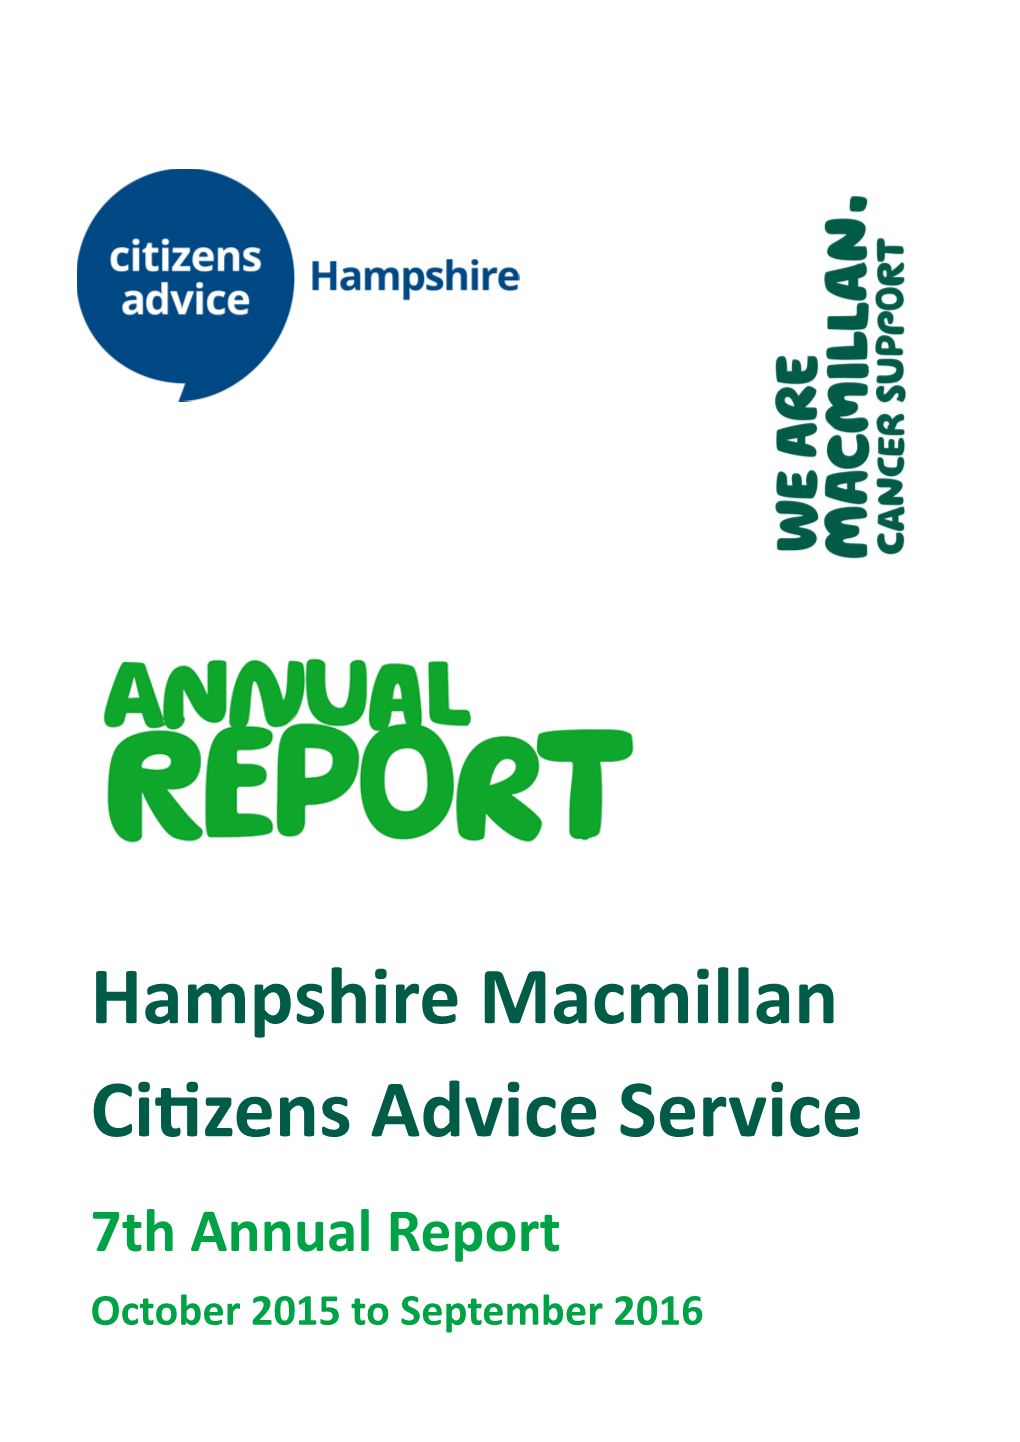 Hampshire Macmillan Citizens Advice Service 7Th Annual Report October 2015 to September 2016